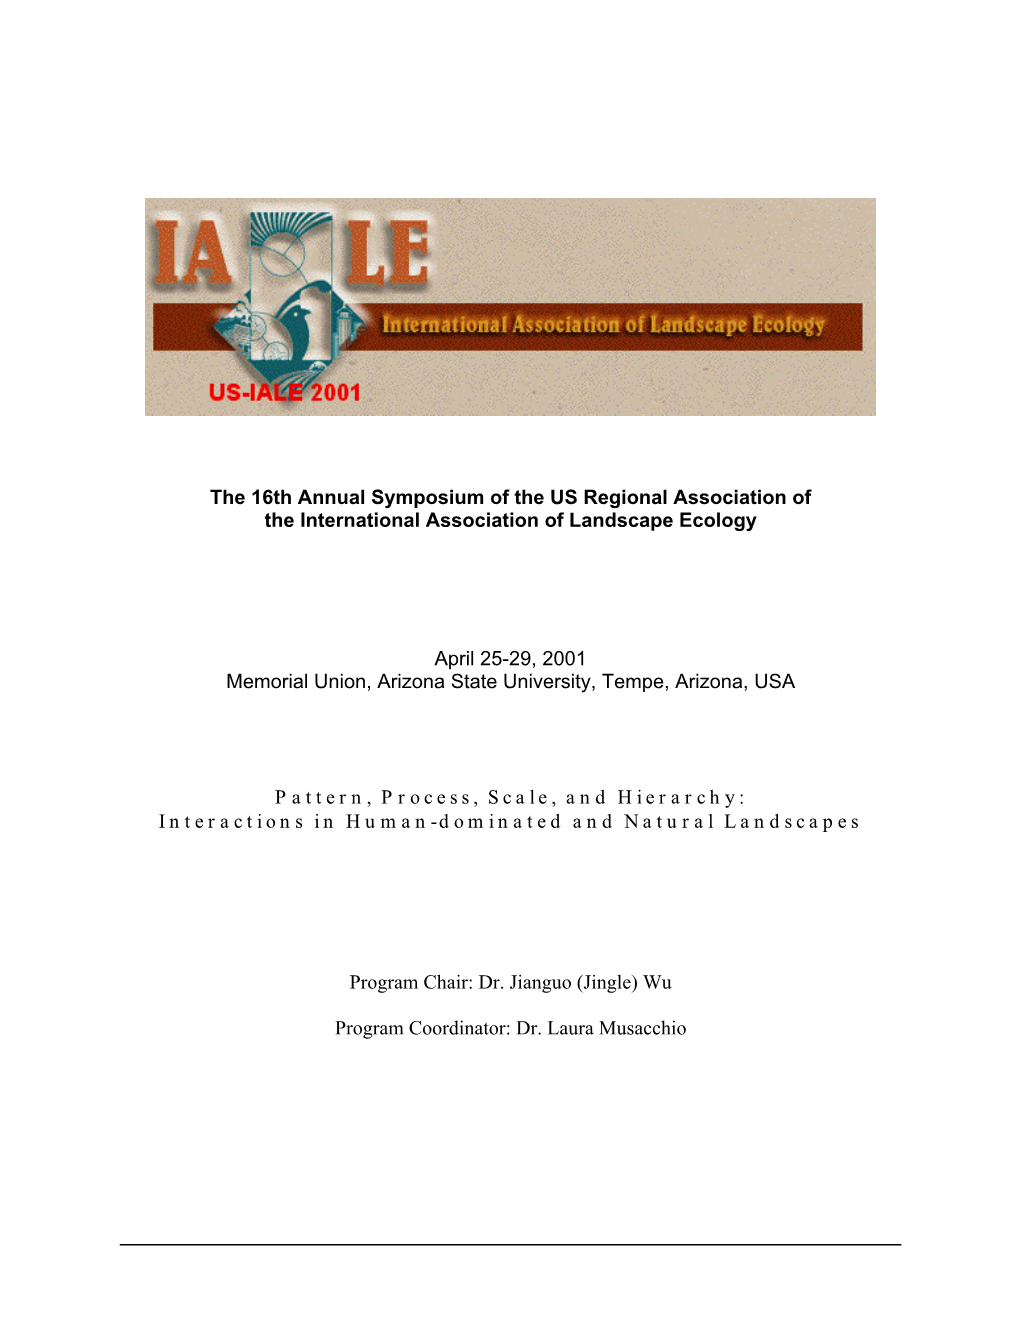 The 16Th Annual Symposium of the US Regional Association of the International Association of Landscape Ecology